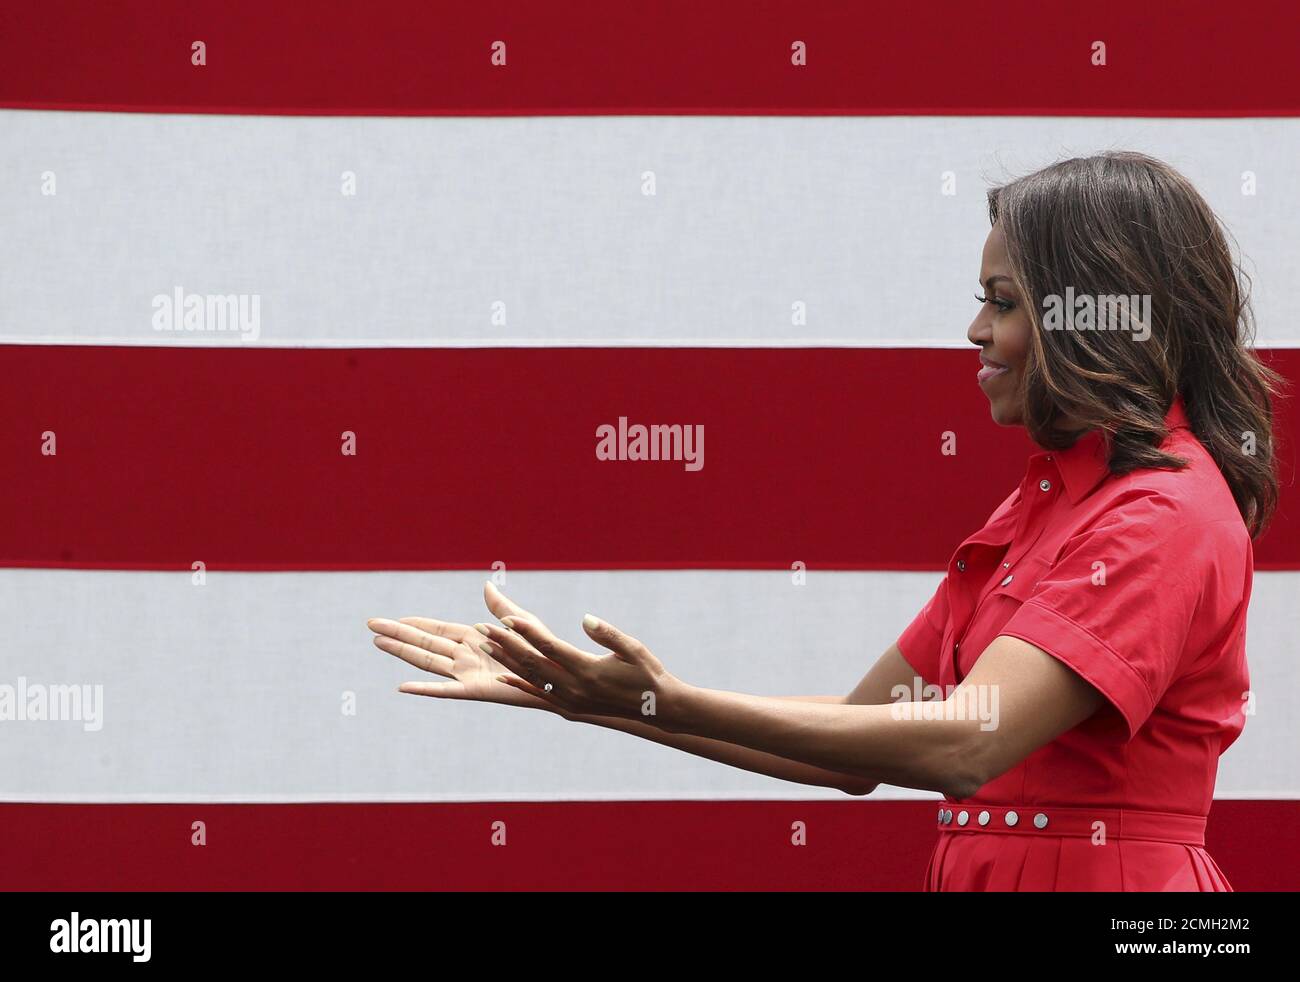 U.S. first lady Michelle Obama gestures during her visit to the U.S. Army Garrison at Vicenza, northern Italy, June 19, 2015.  REUTERS/Stefano Rellandini Stock Photo